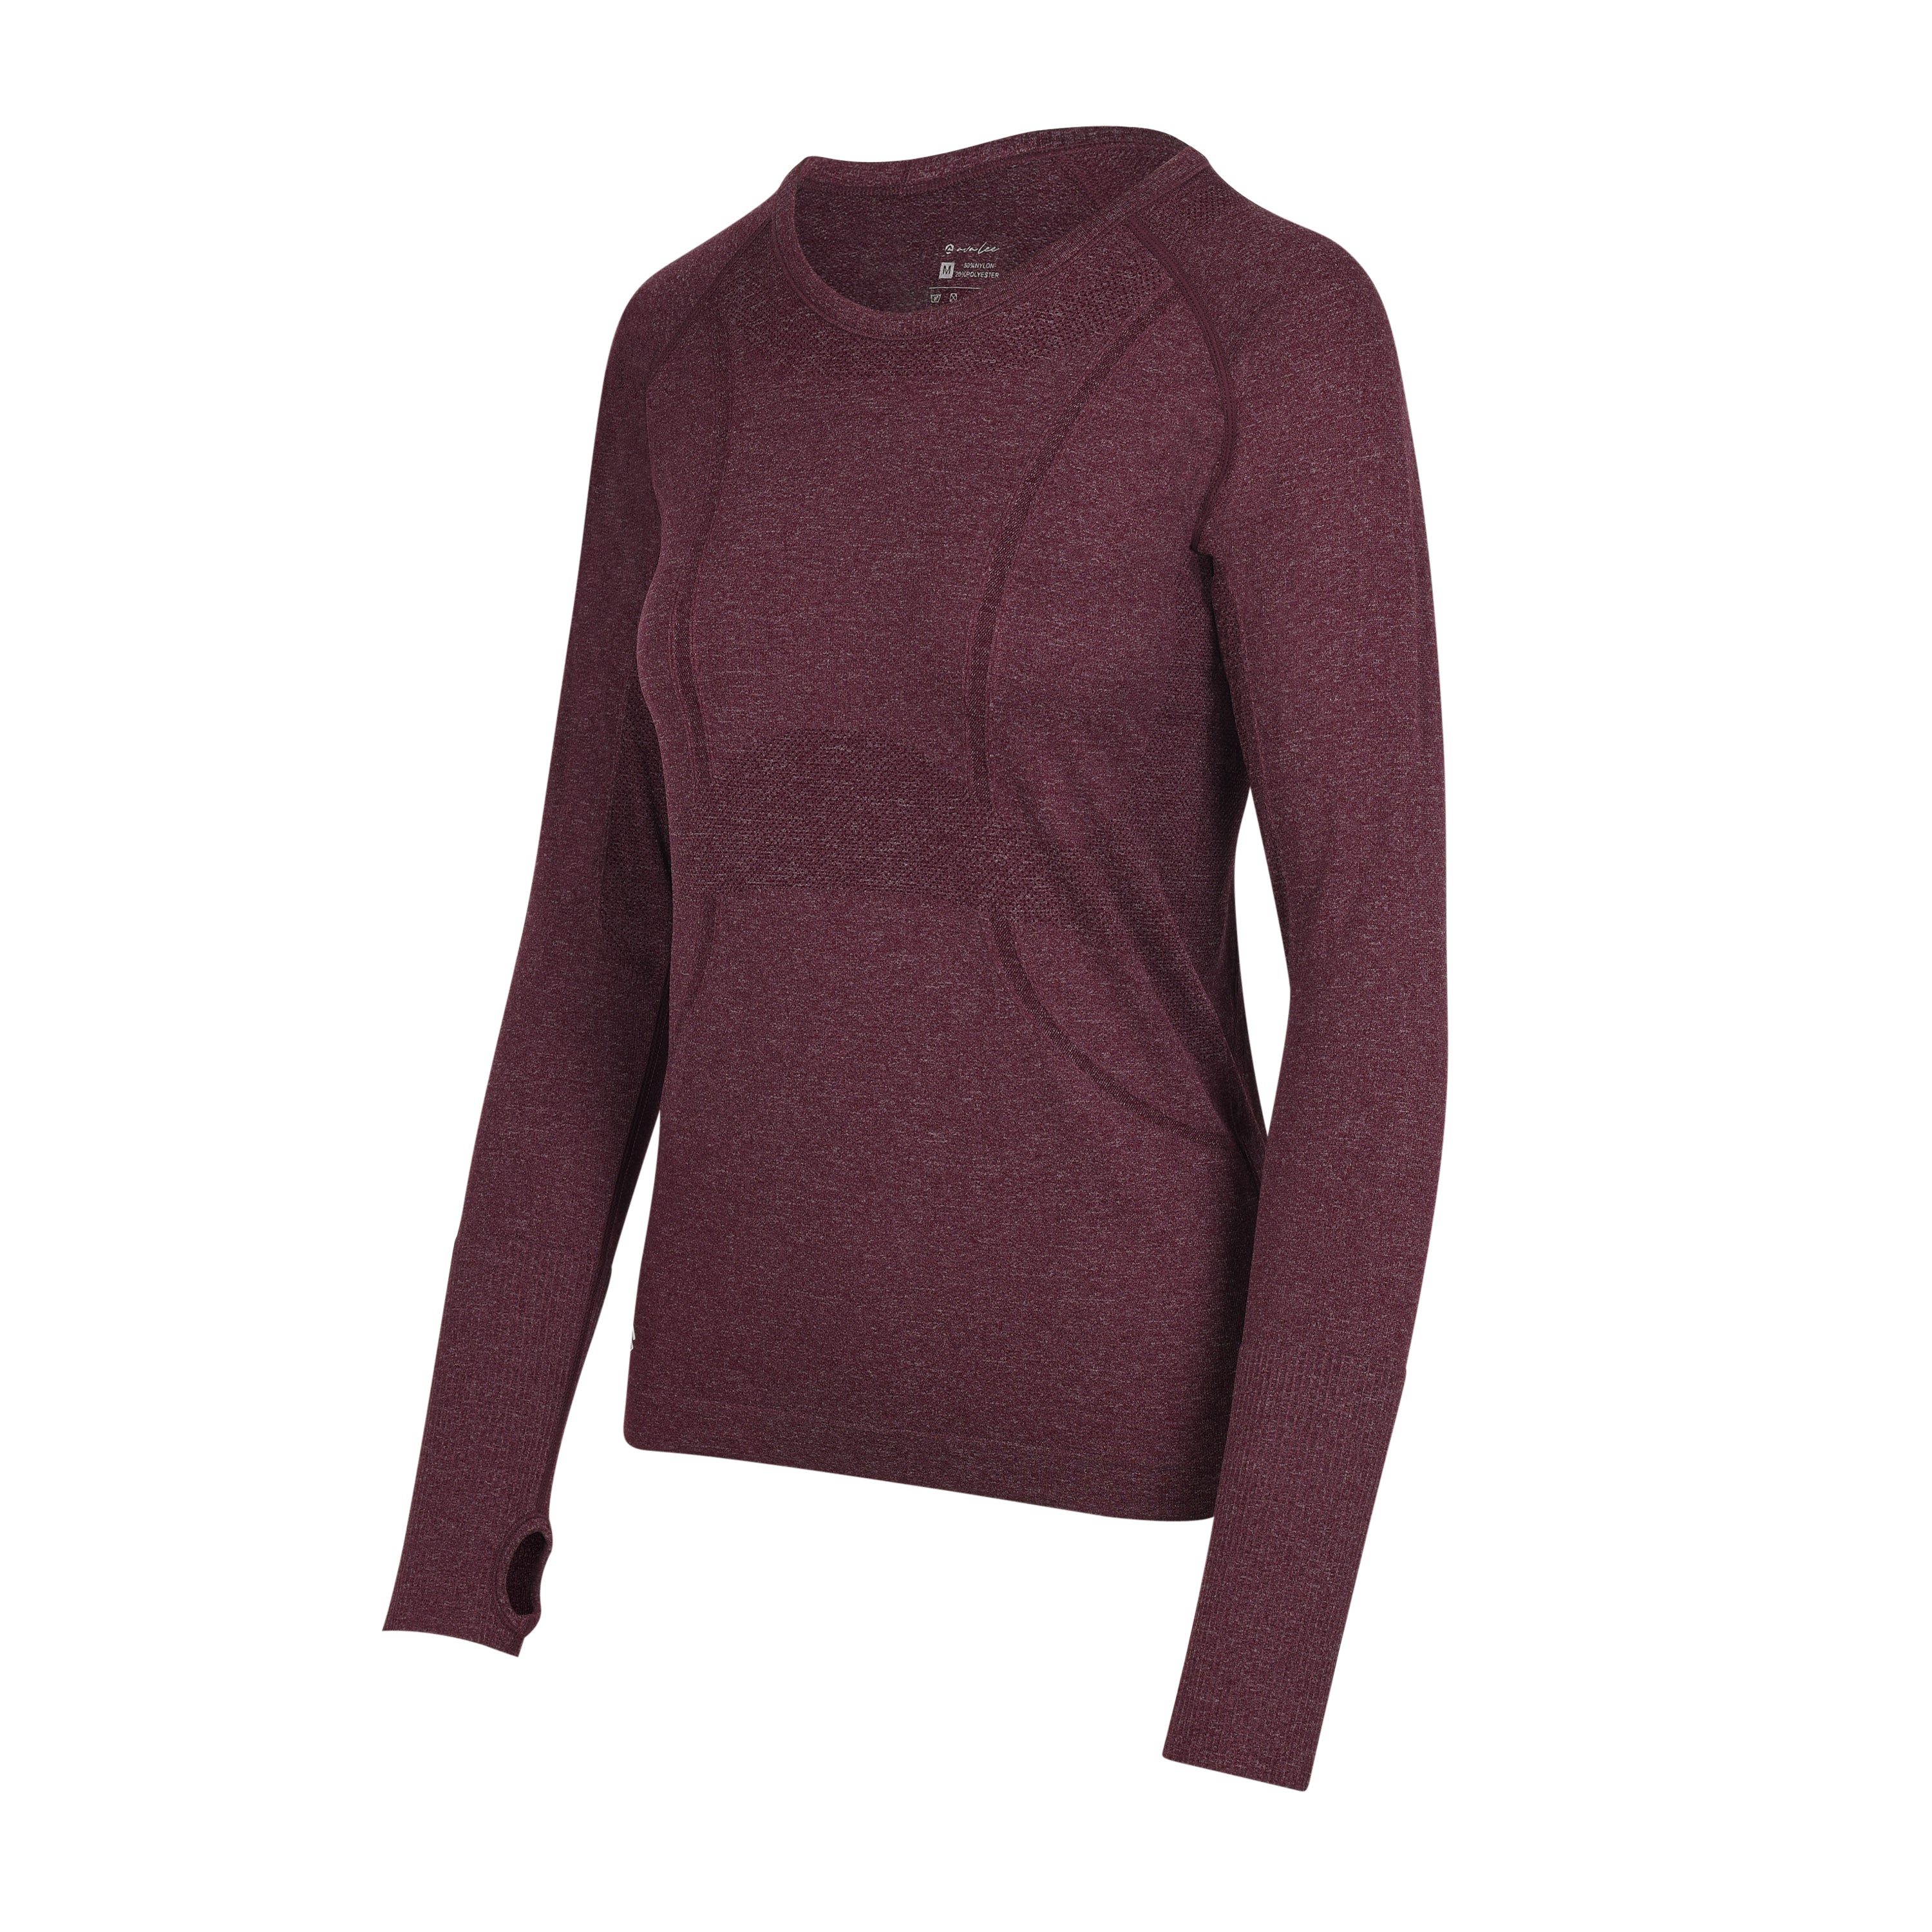 Shop the Ava Lee Fitted Longsleeve T-Shirt, a seamless blend of style, comfort, and functionality. By uniting high-performance court fashion with comfort, quality, and wearability, Ava Lee meets the needs of modern women everywhere. Because function, fit, and fashion all matter.